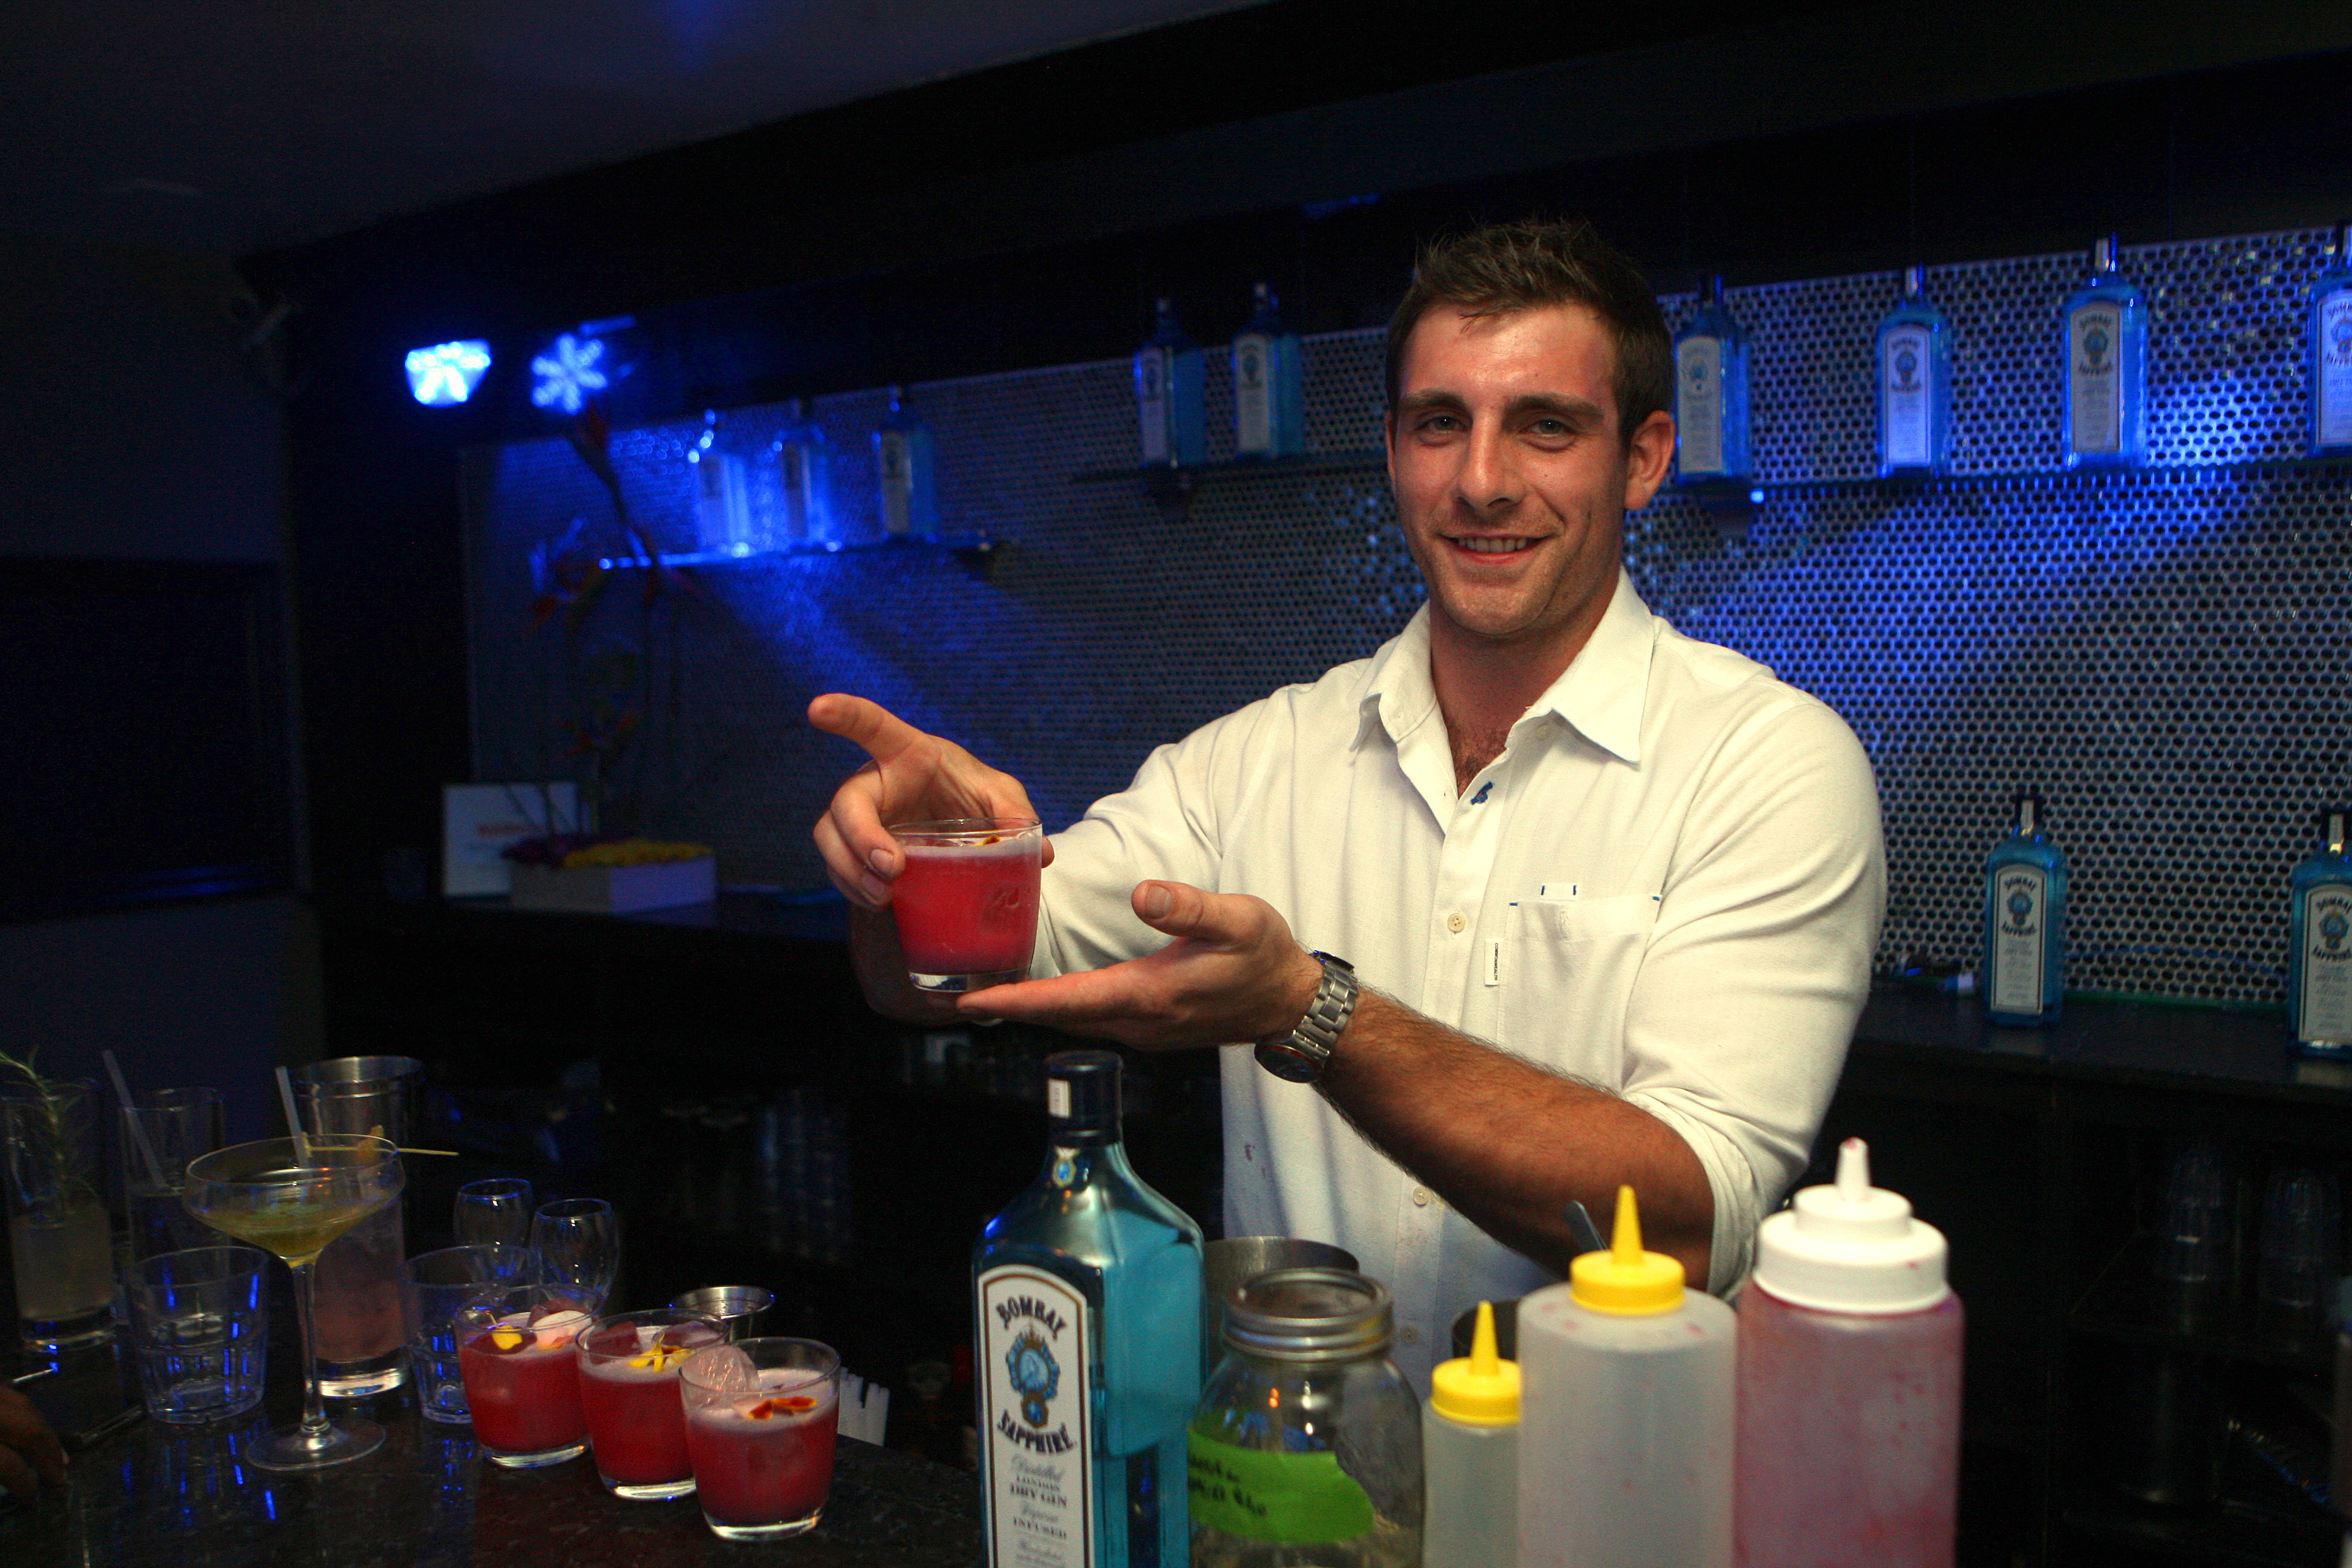 Local in the Running for Nation’s “Most Imaginative Bartender”